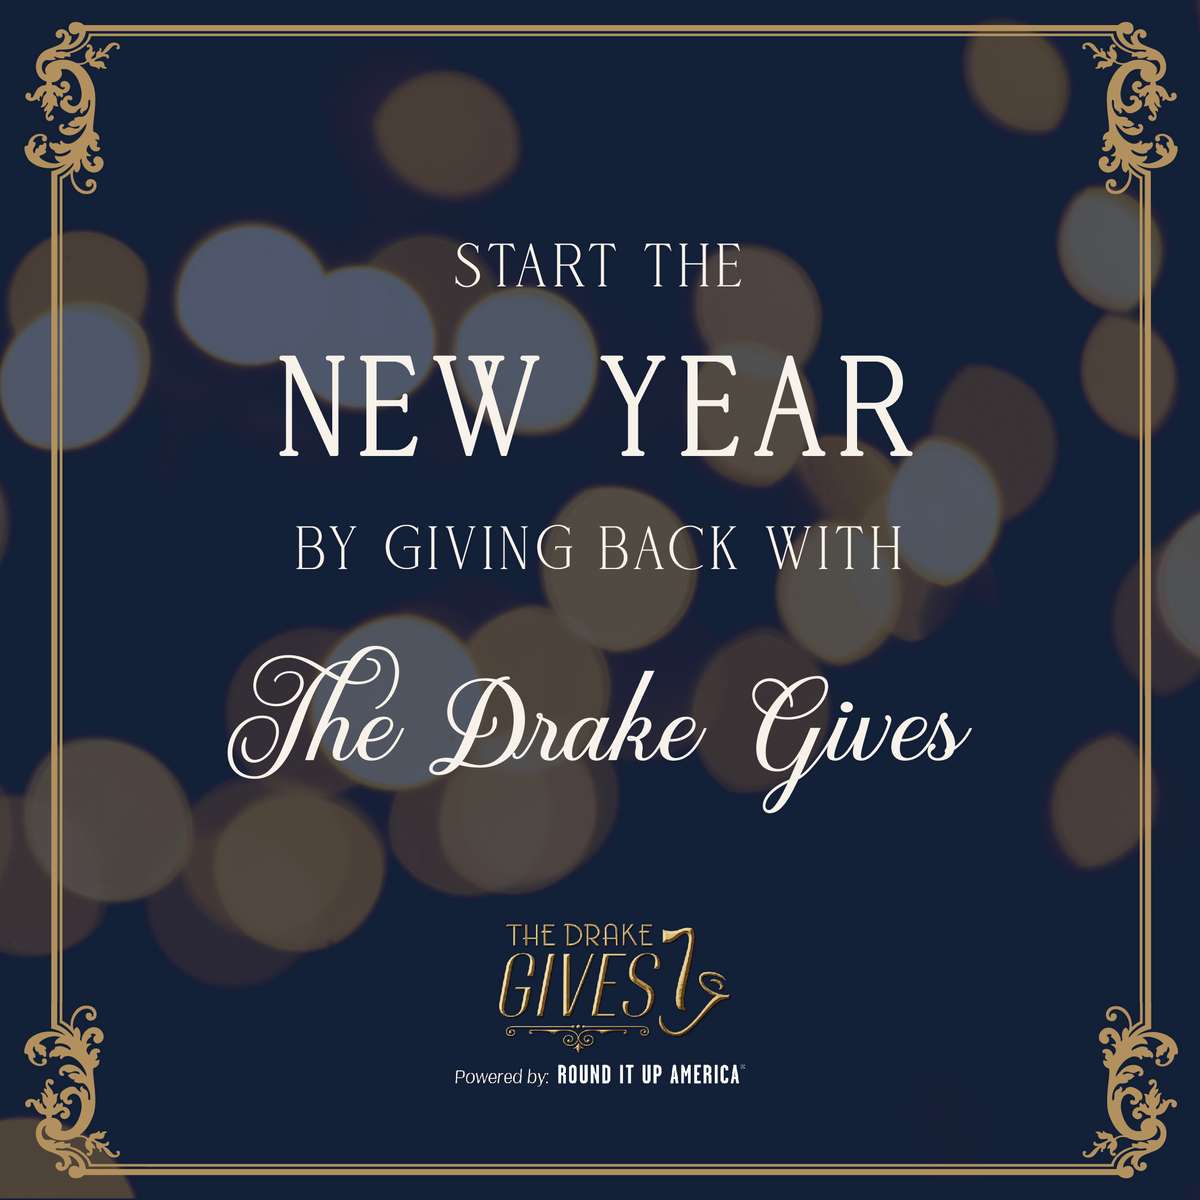 A new year with new opportunities. Start 2022 by giving back with The Drake Gives💛.